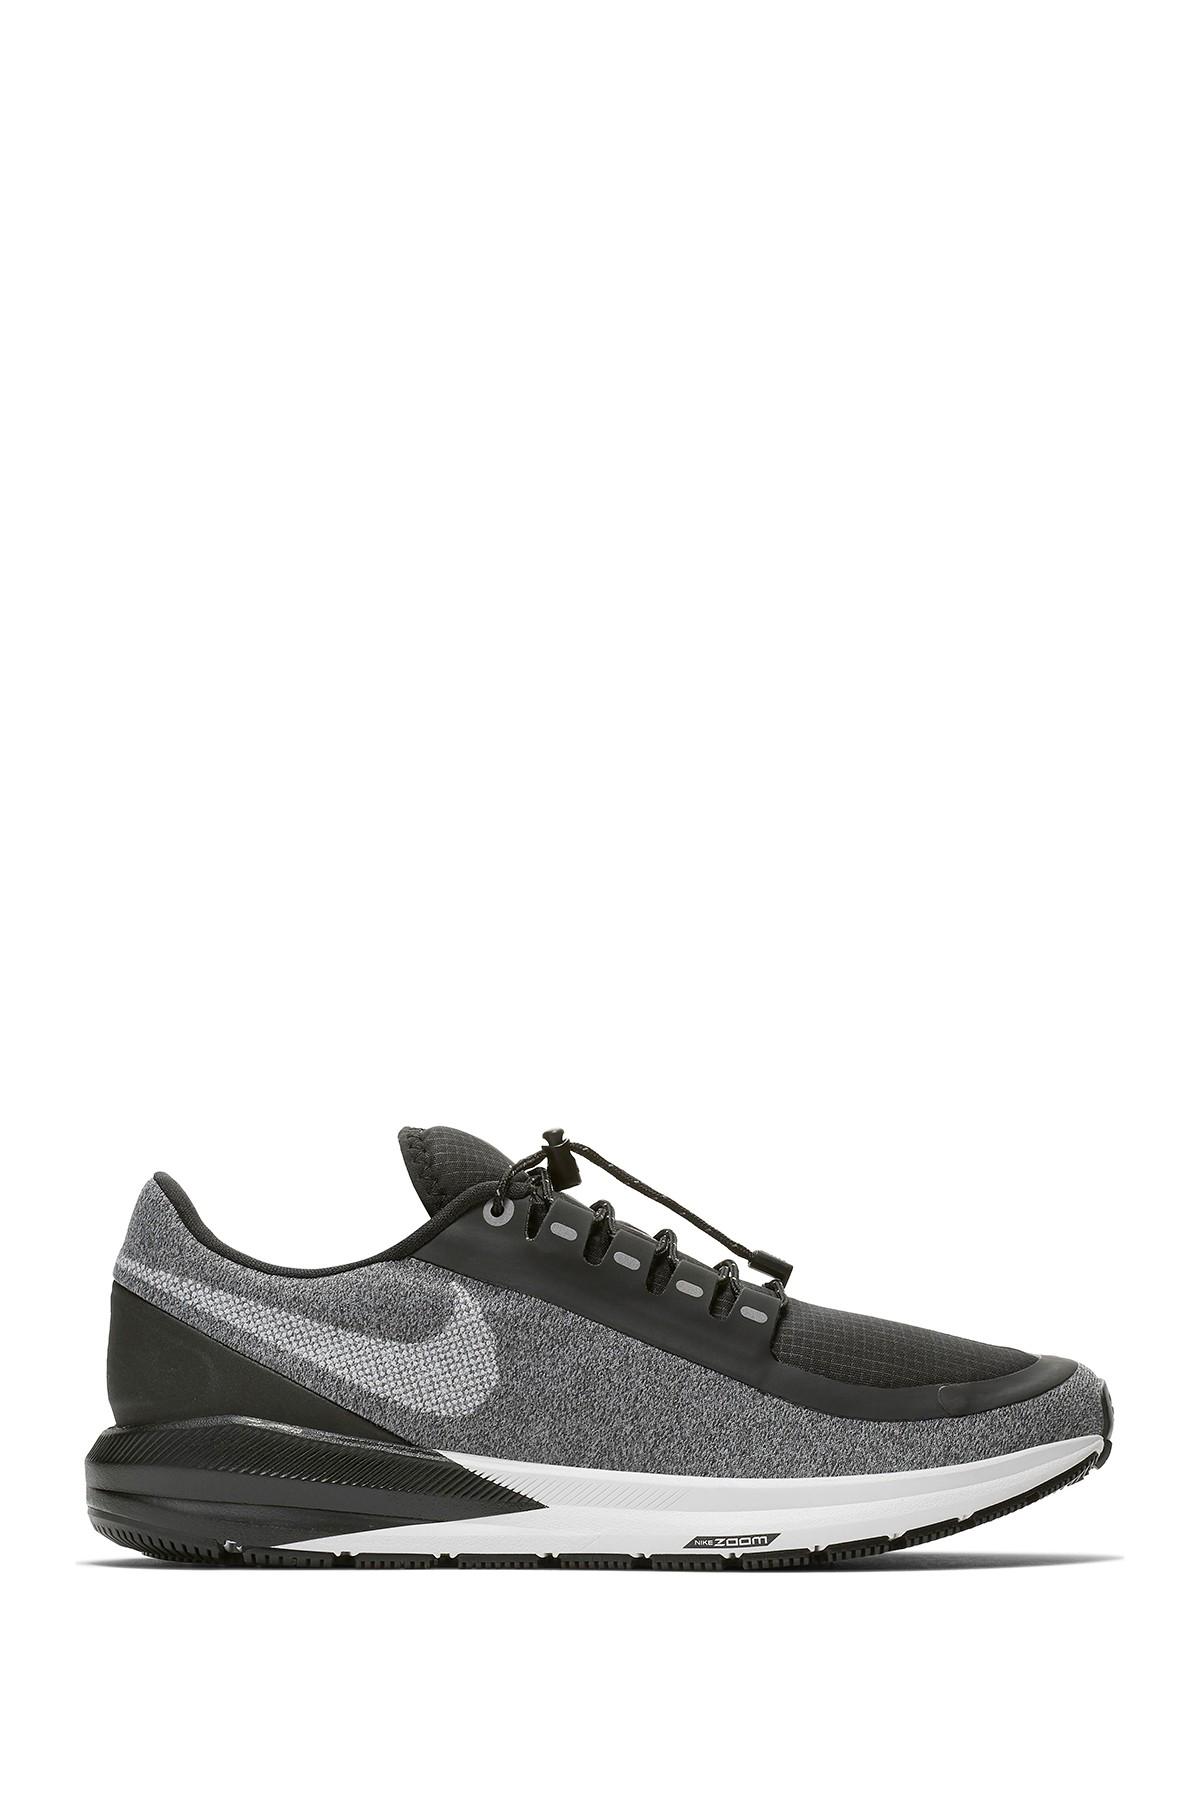 Nike Air Zoom Structure 22 Shield Running Sneaker in Black - Lyst